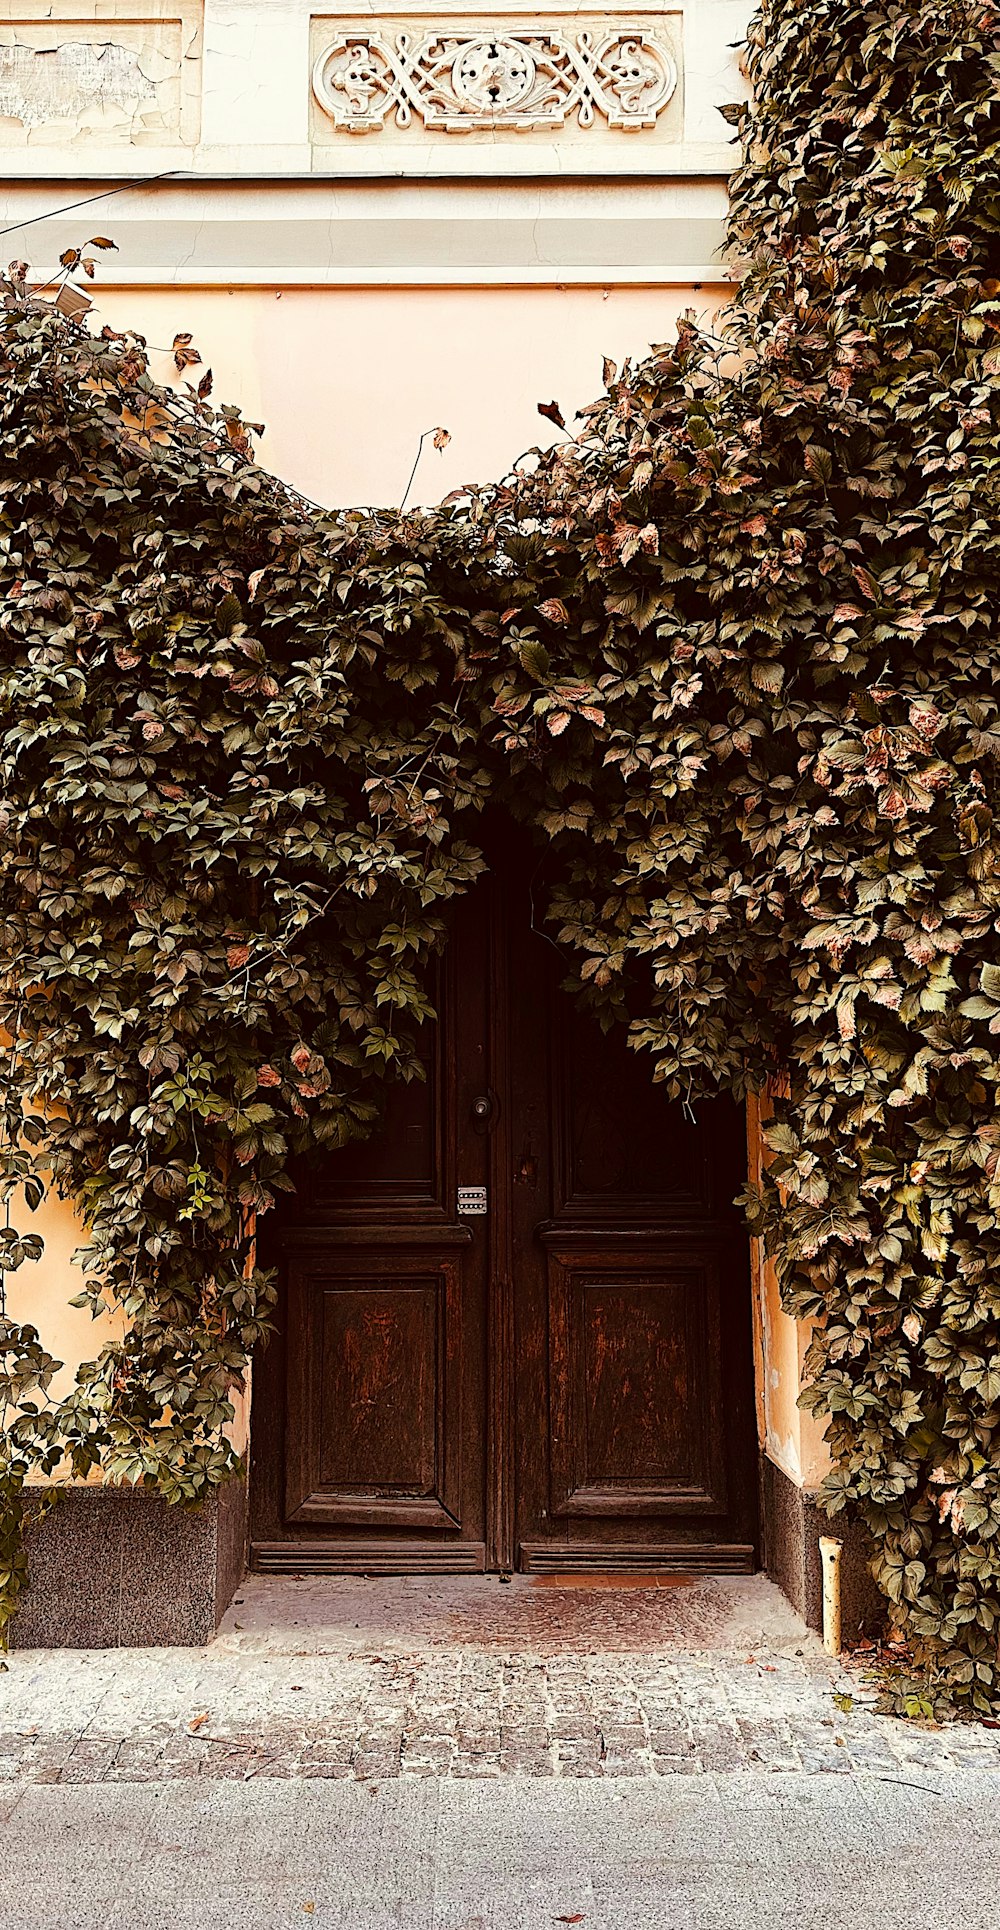 a building covered in vines next to a wooden door